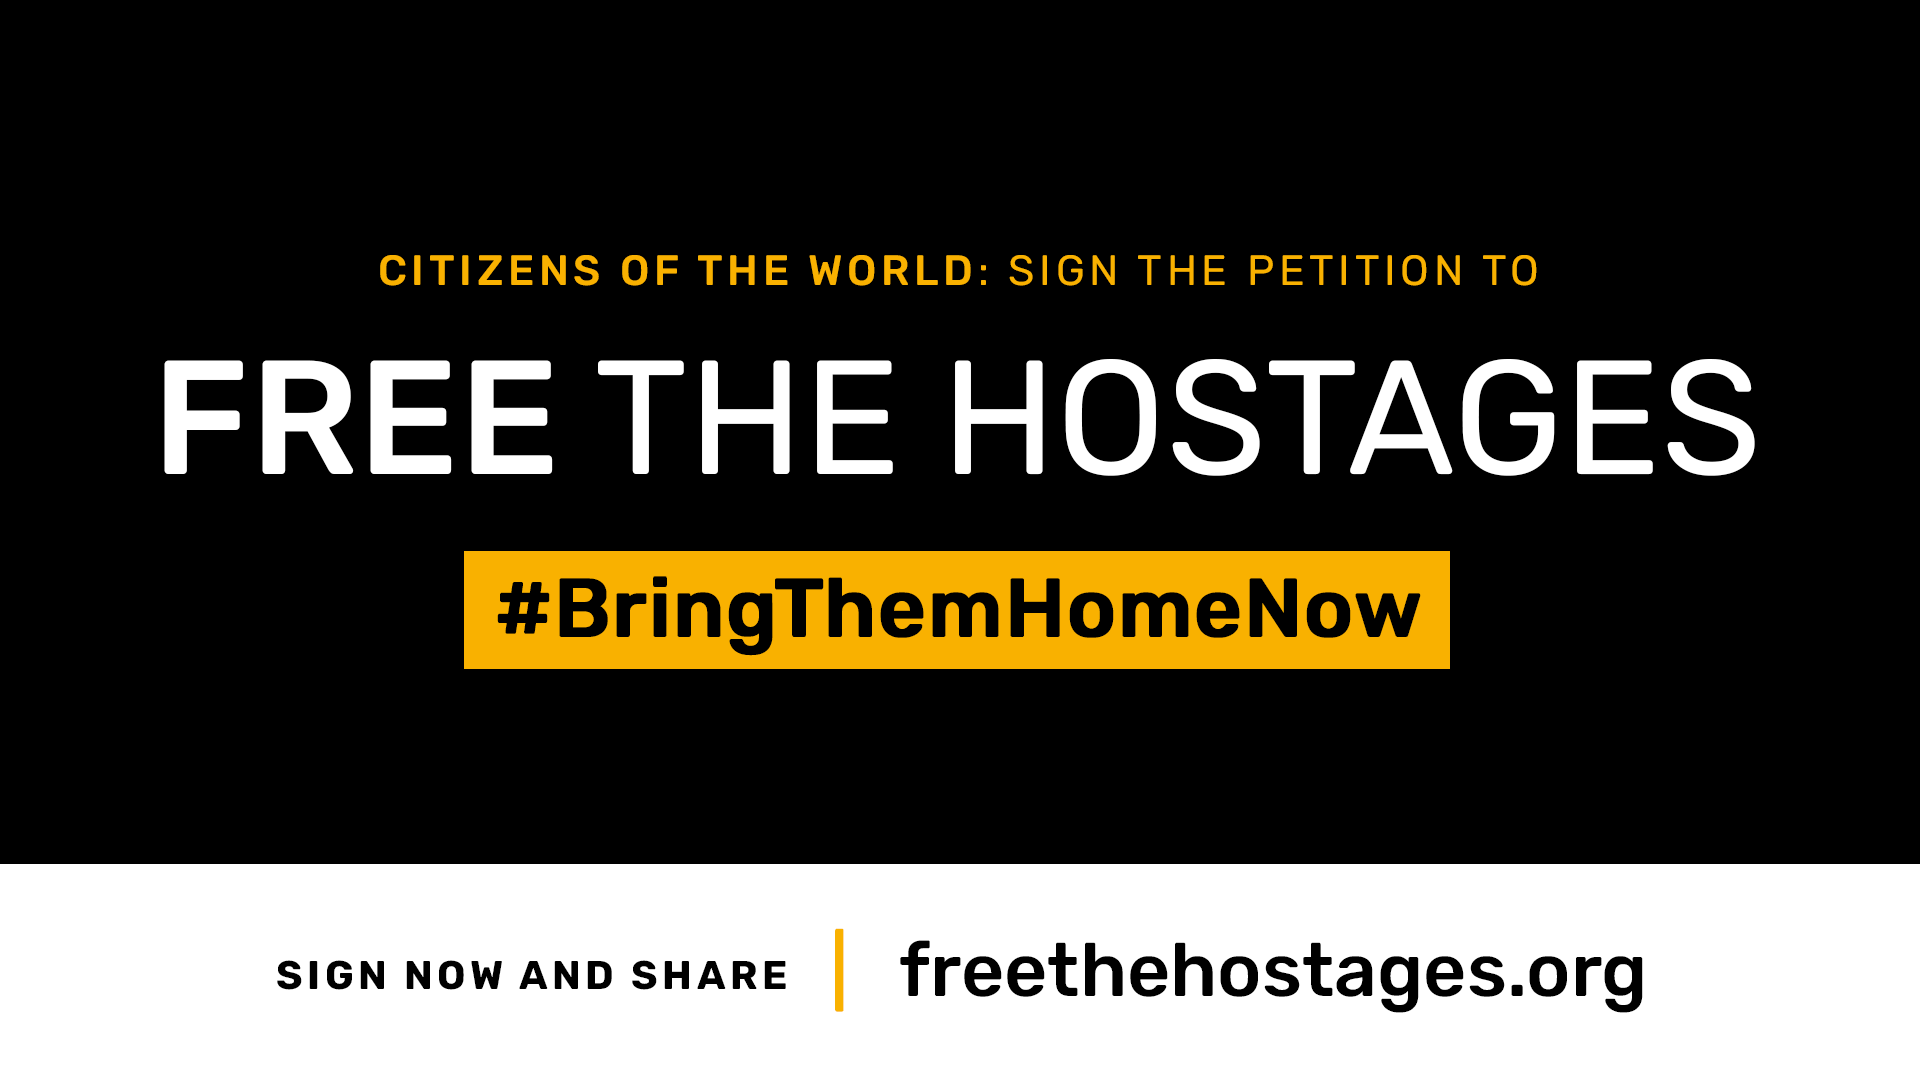 Sign the petition to #FreeTheHostages (freethehostages.org)